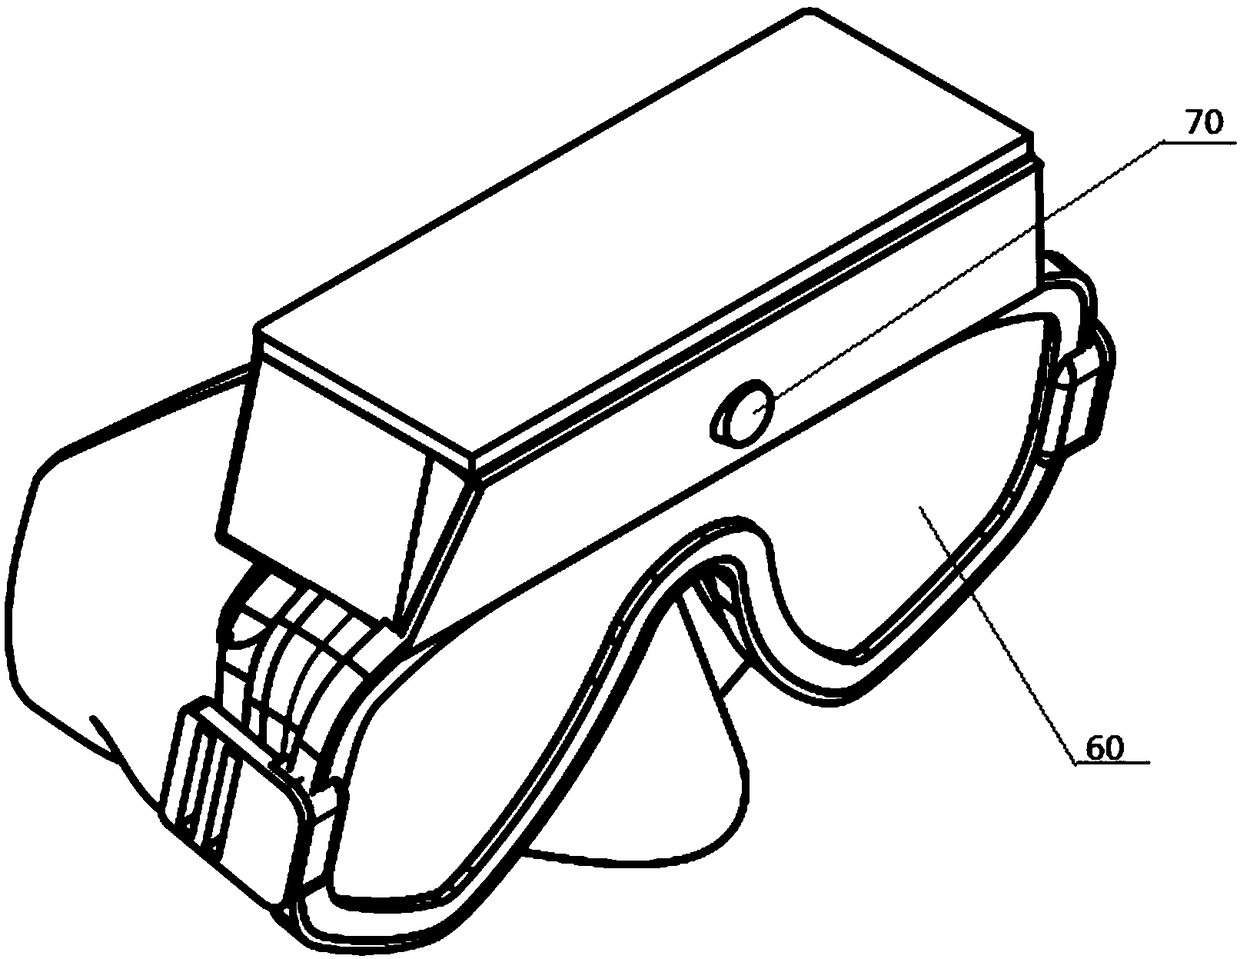 Swimming goggles with transparent display screen